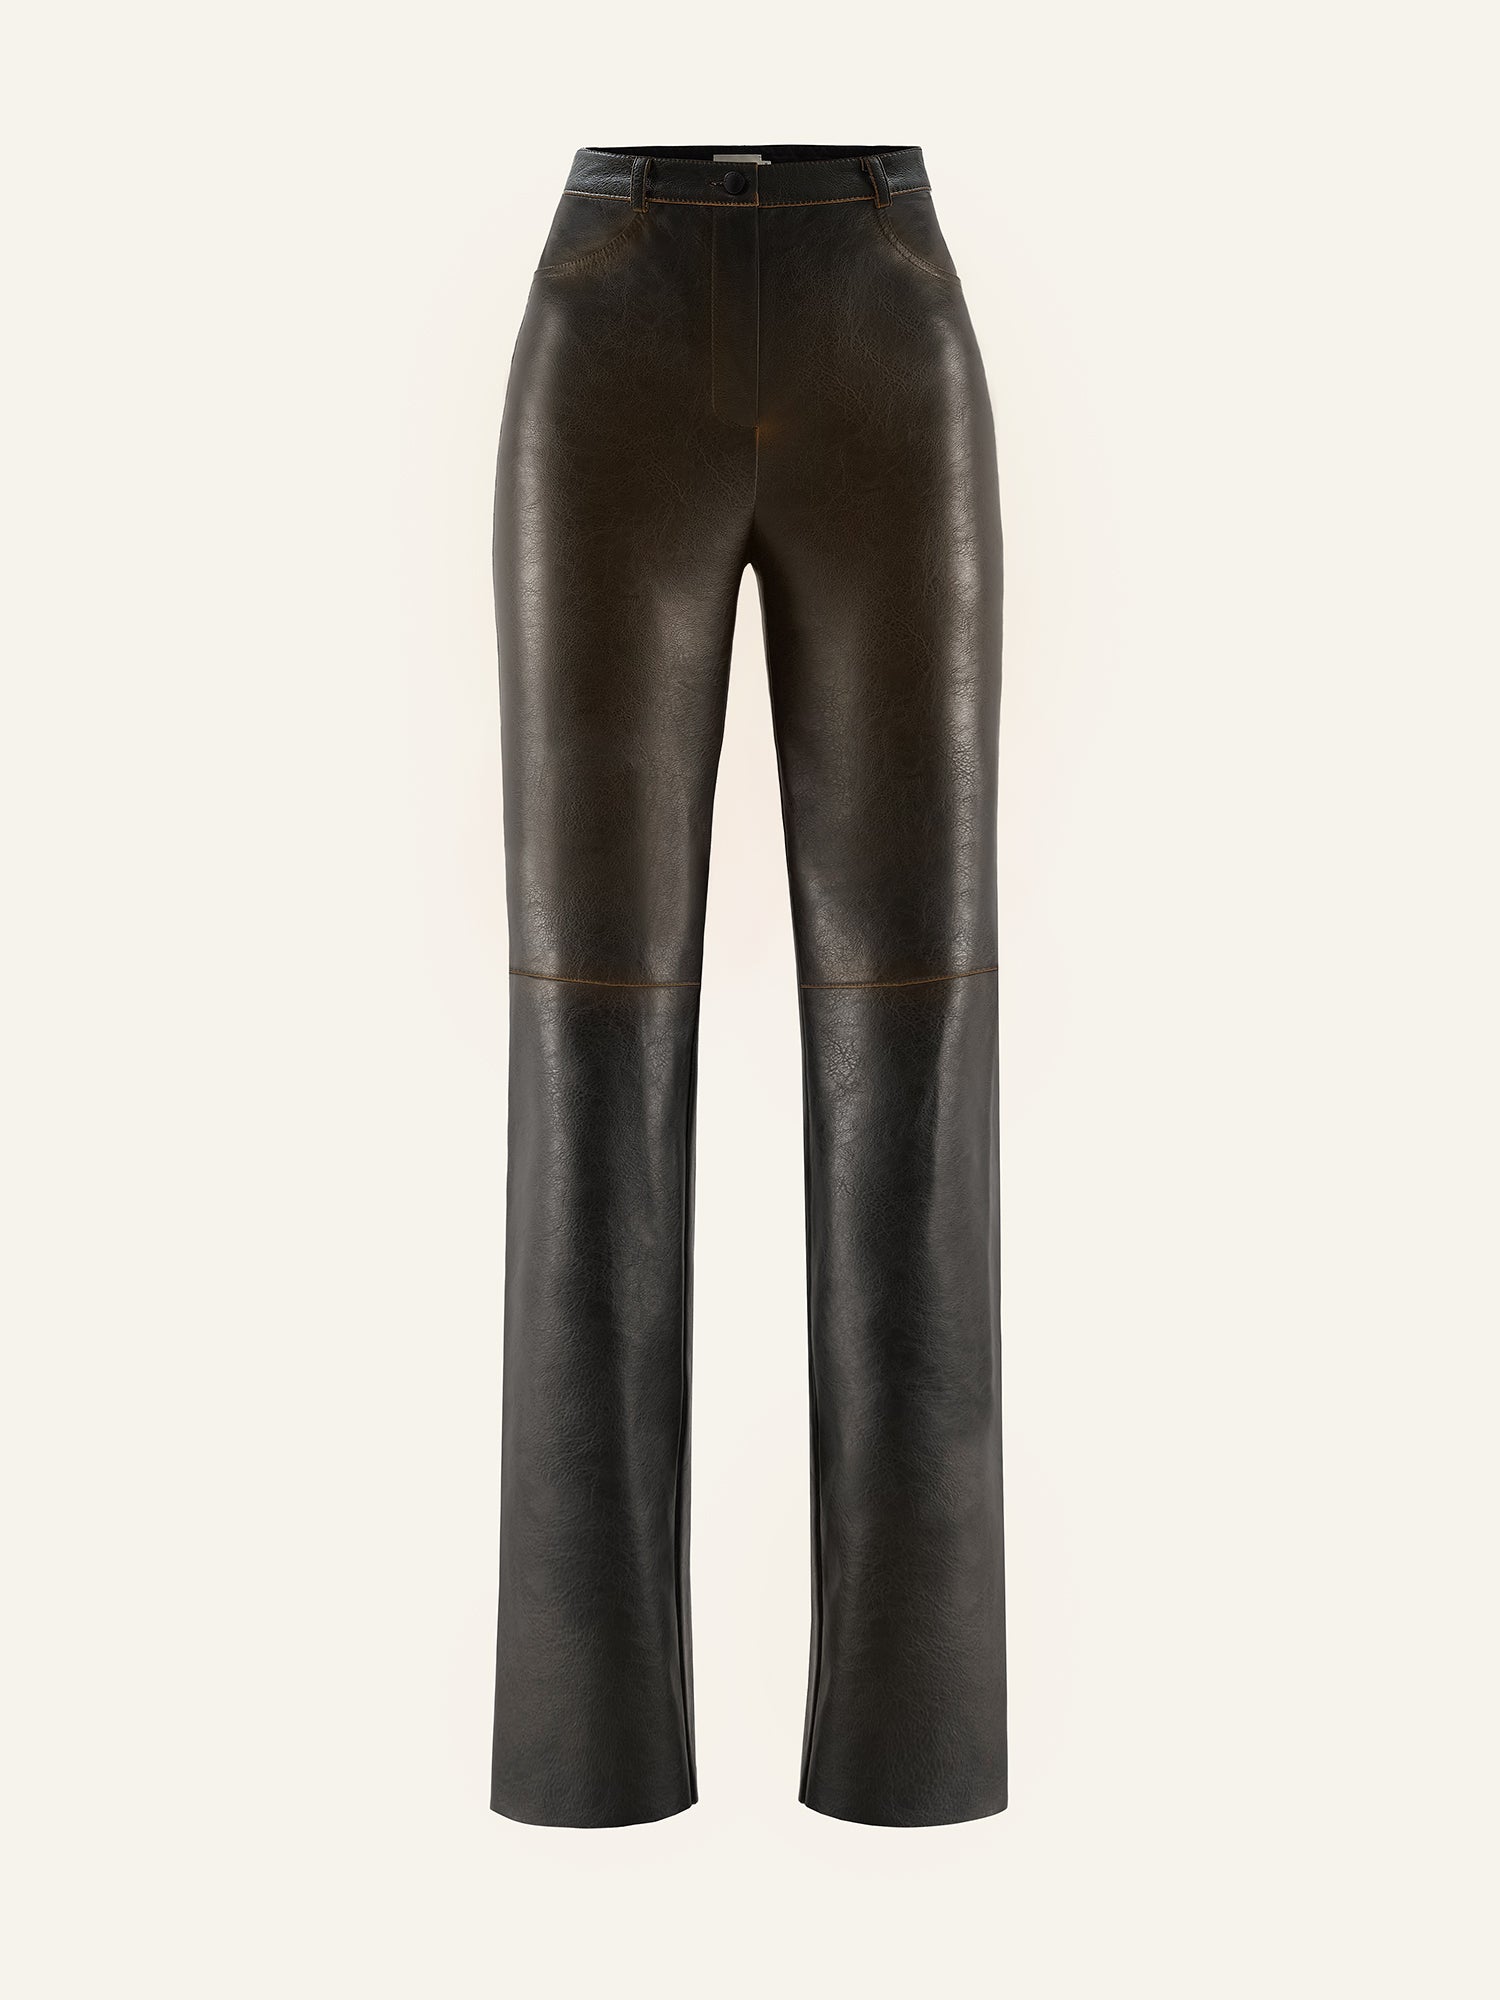 Product photo of brown vegan leather high rise straight leg pants